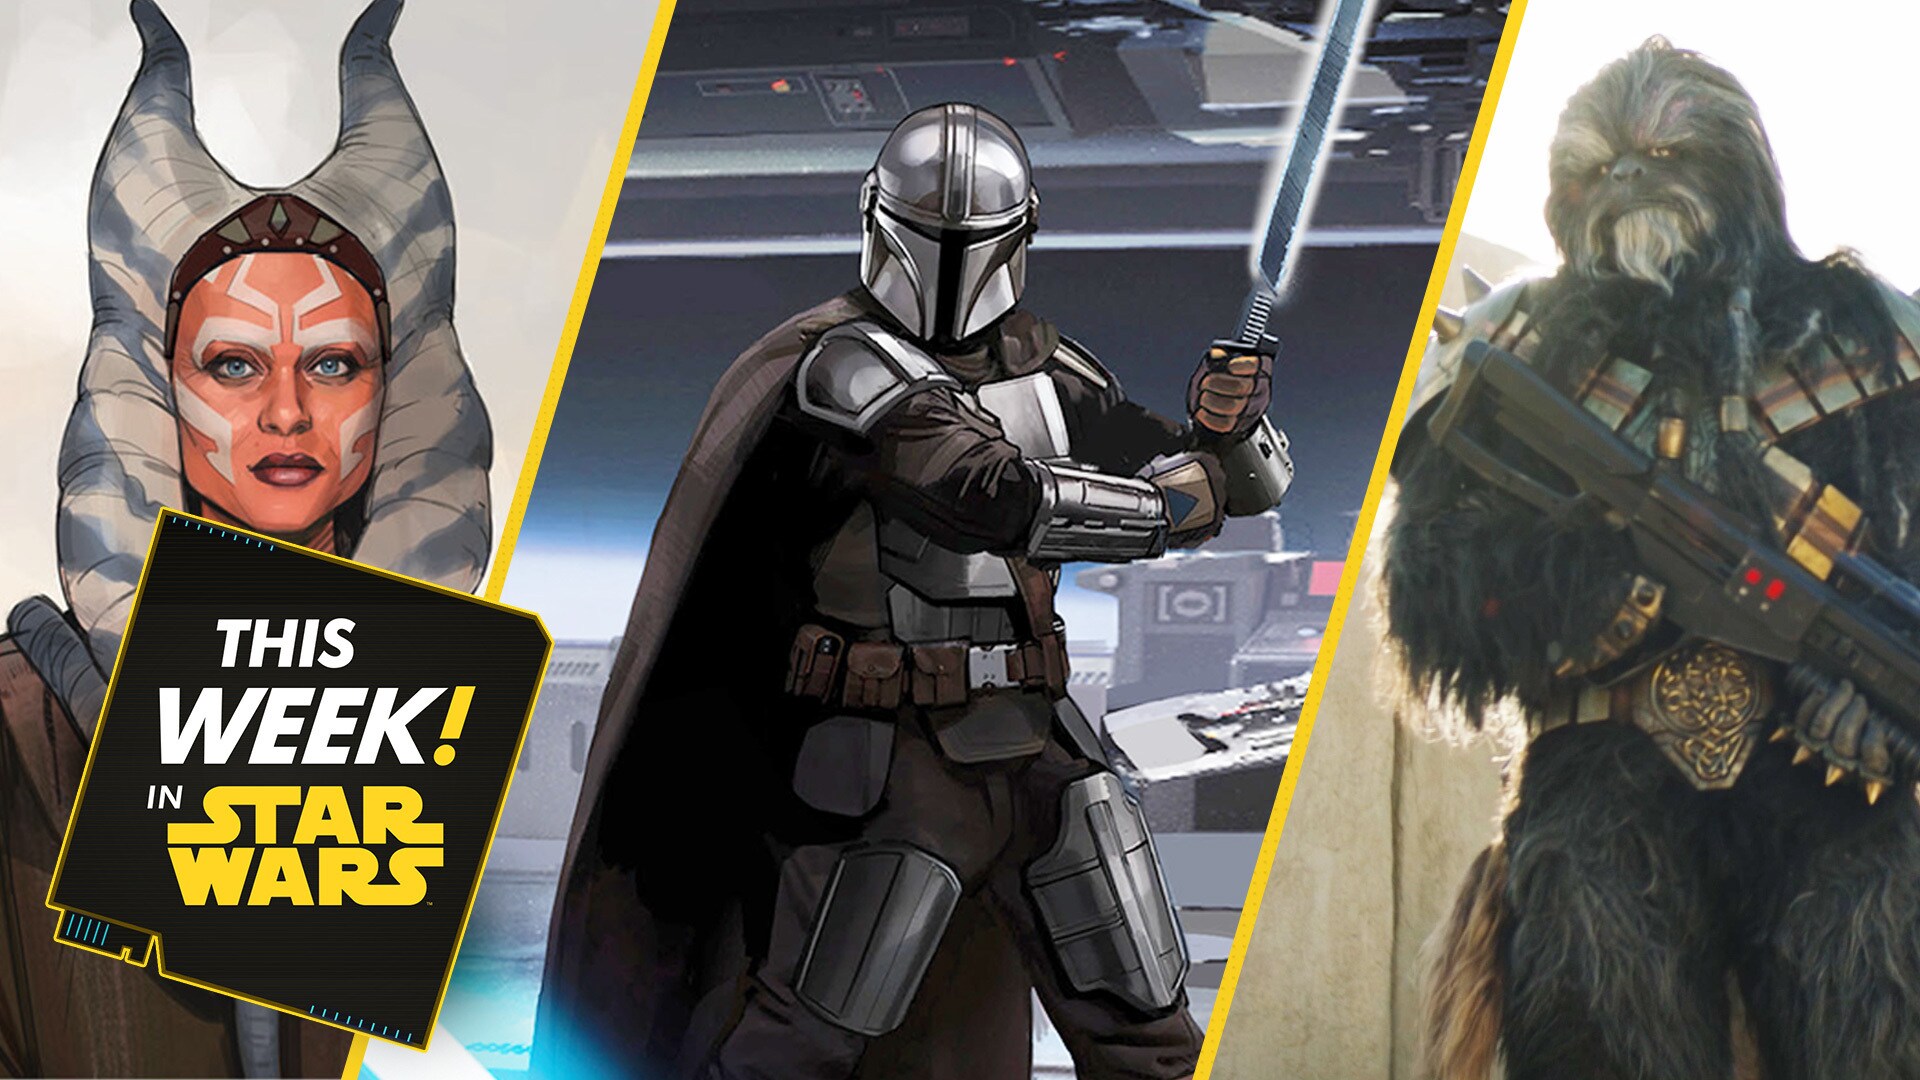 Exclusive Art from The Mandalorian, The Book of Boba Fett Has Arrived, and More!